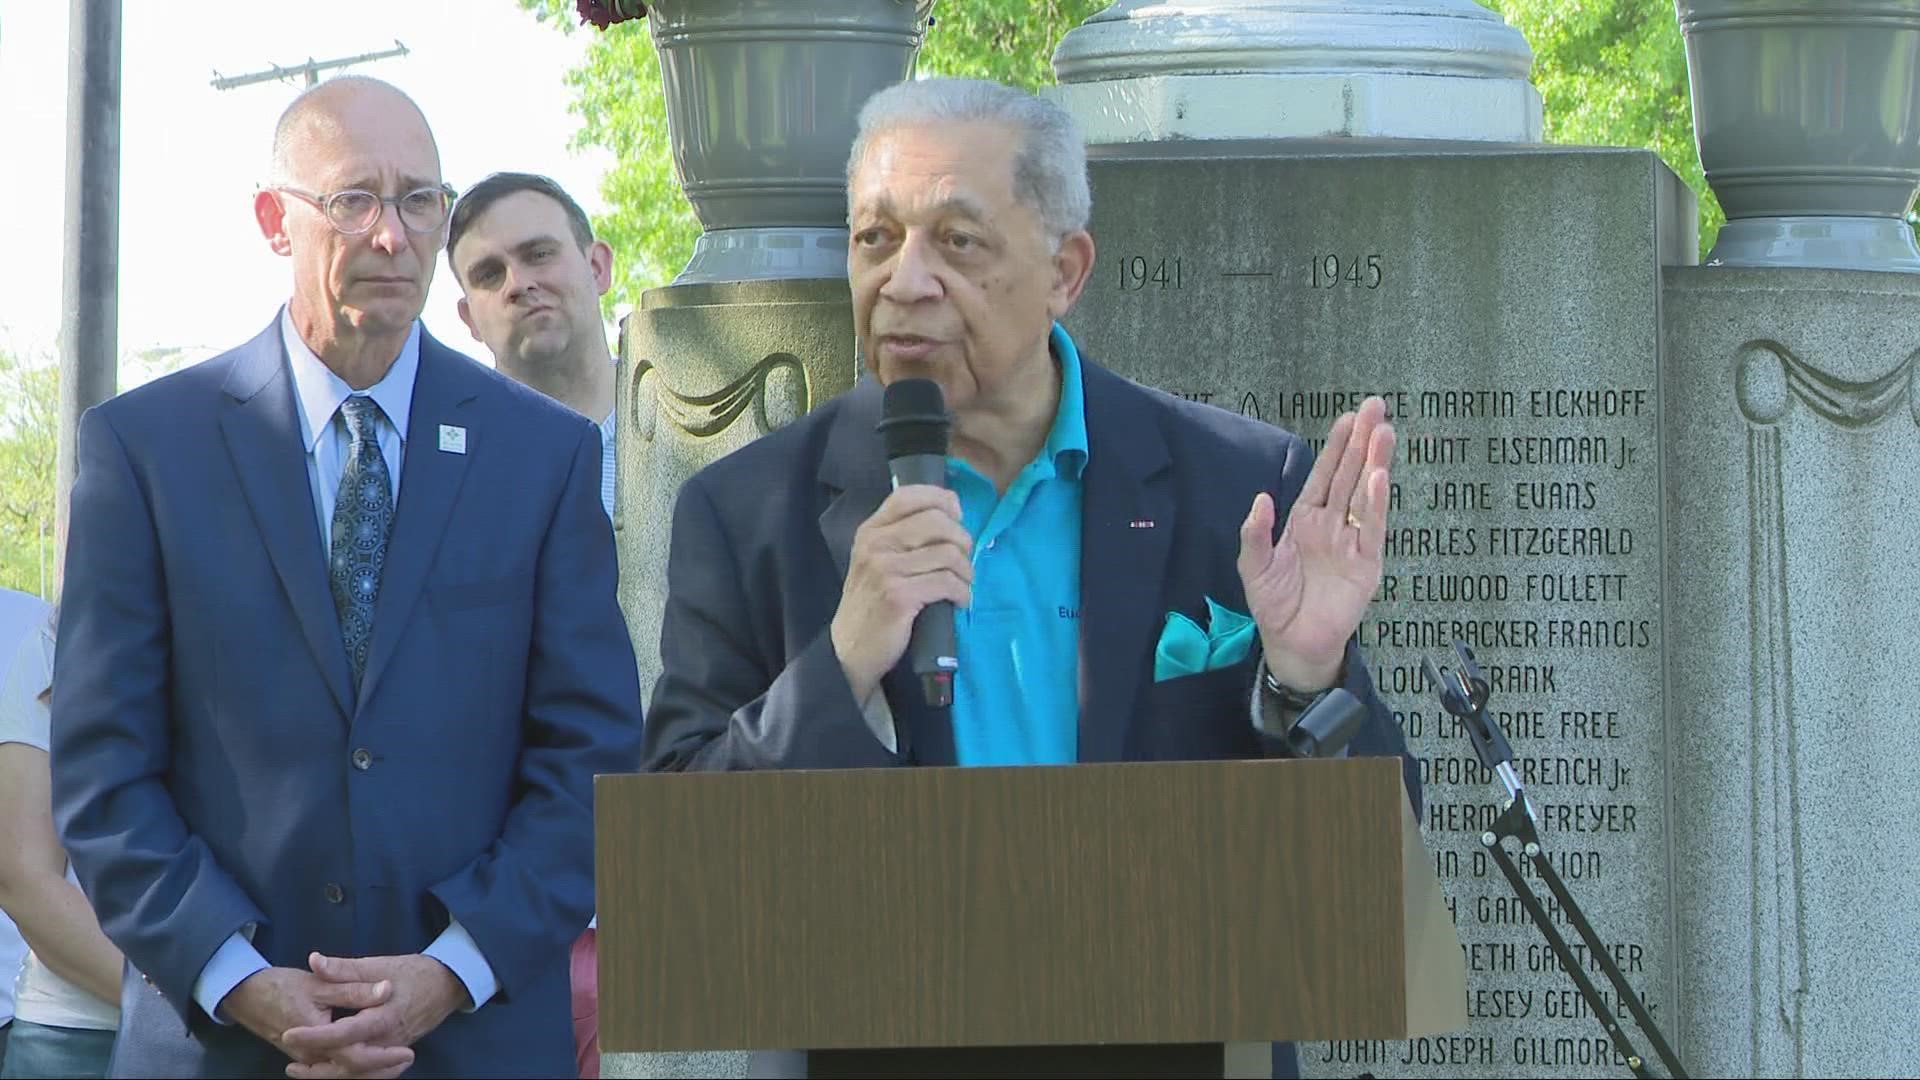 As we mark Memorial Day 2022, the Monday service that happened outside of Shaker Heights City Hall featured 3News’ Leon Bibb as a special guest speaker.